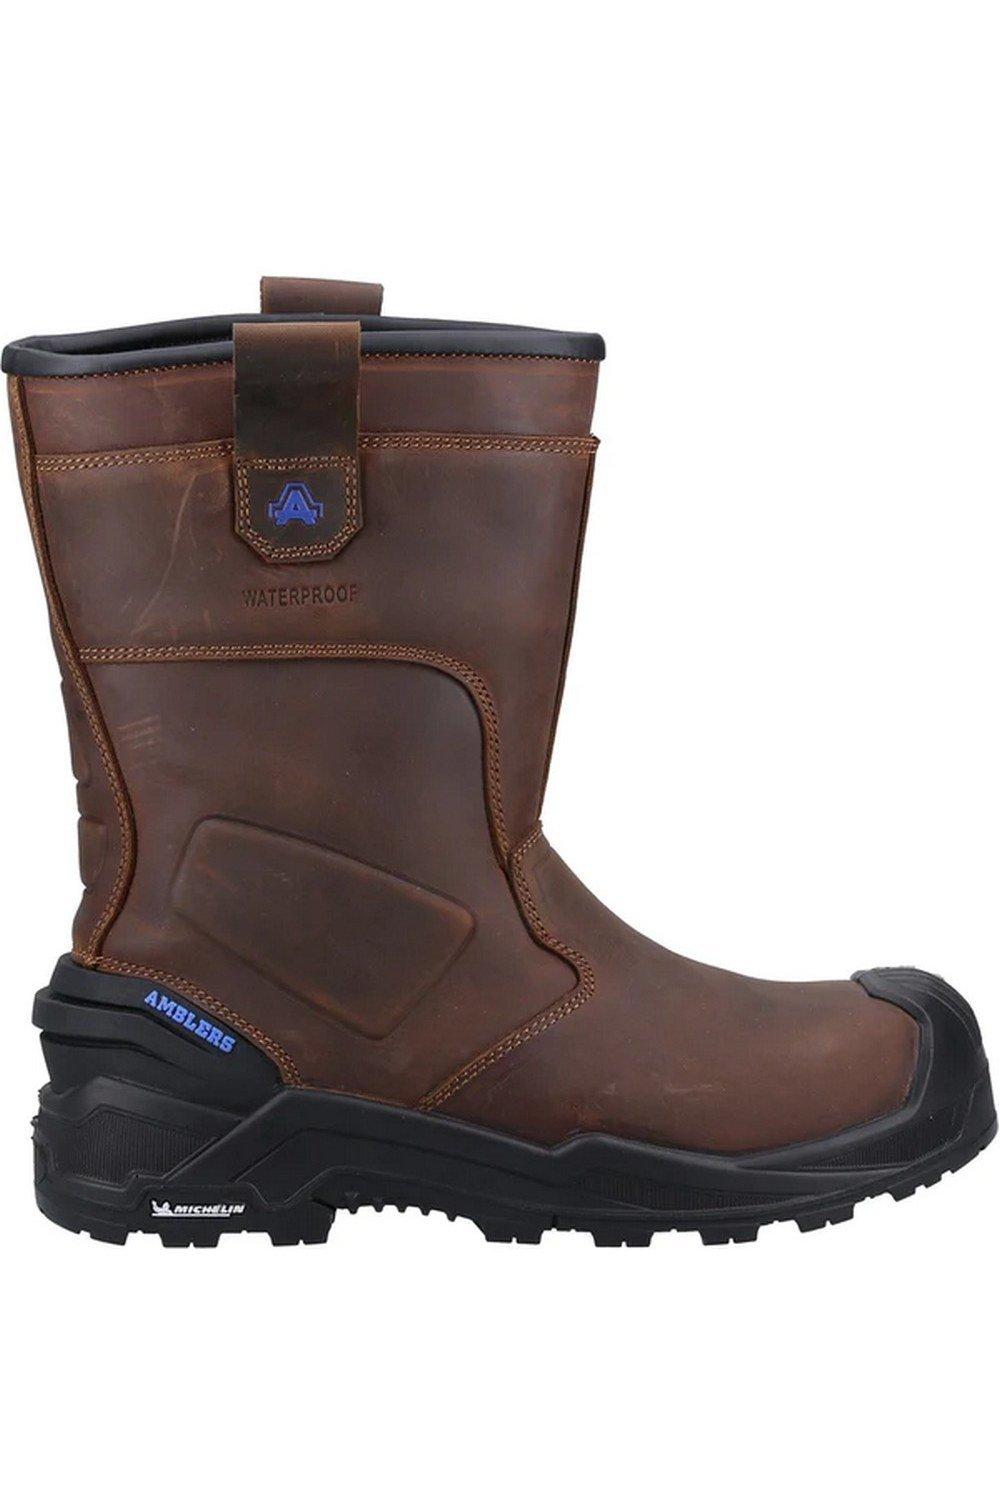 AS983C Conqueror Rigger Grain Leather Safety Boots